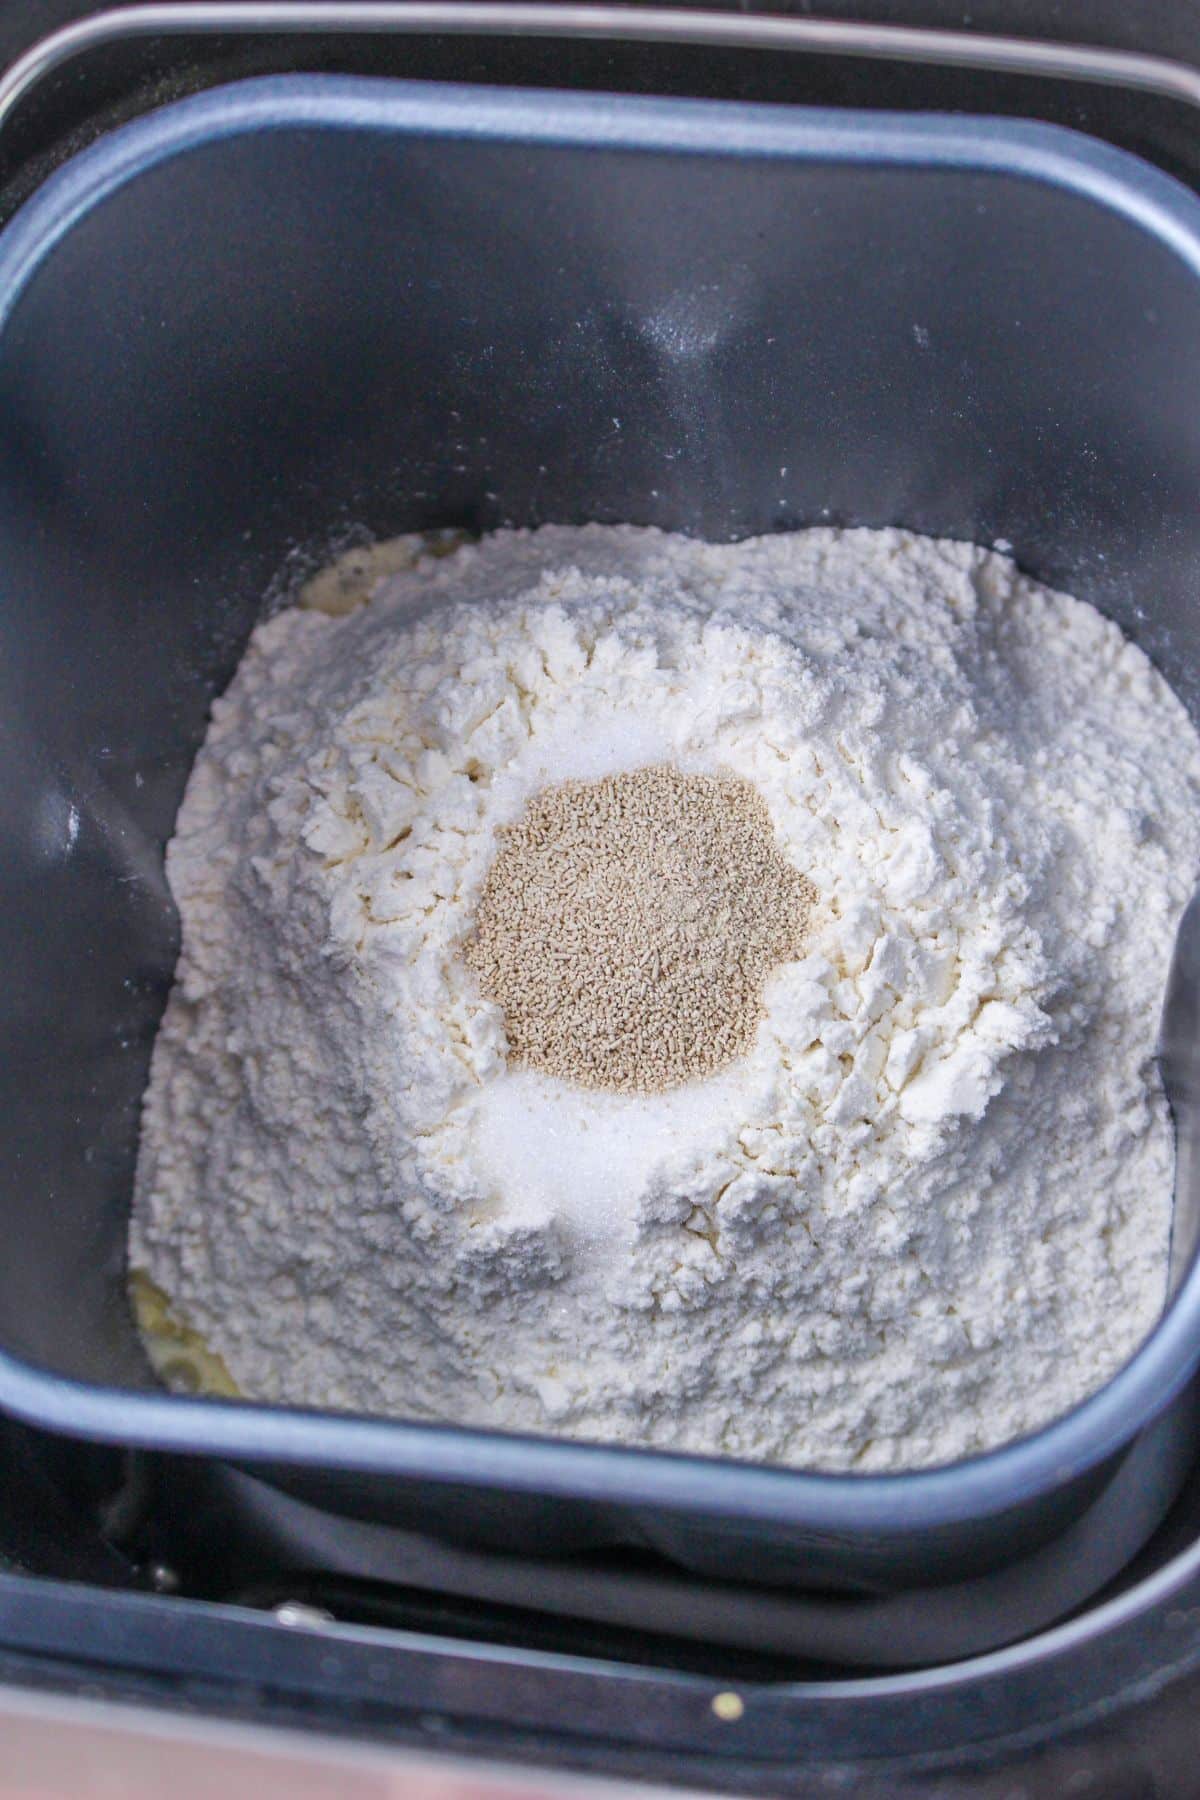 flour, salt, and yeast being added to the loaf pan.